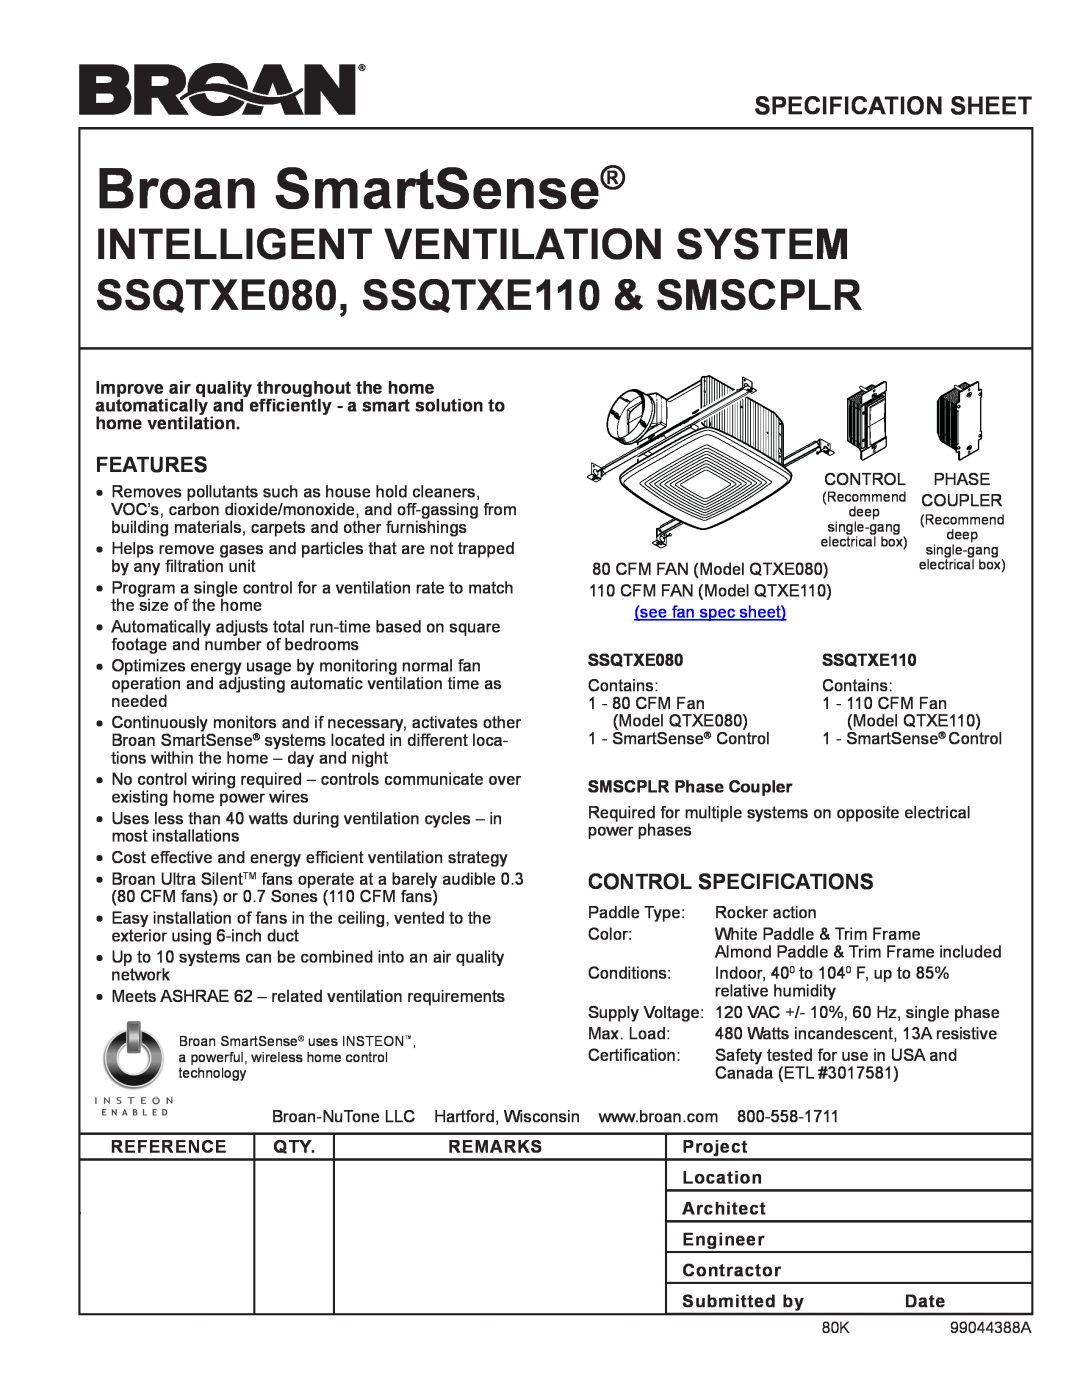 Broan SSQTXE080 specifications features, control specifications, SMSCPLR Phase Coupler, Reference, Remarks, Submitted by 